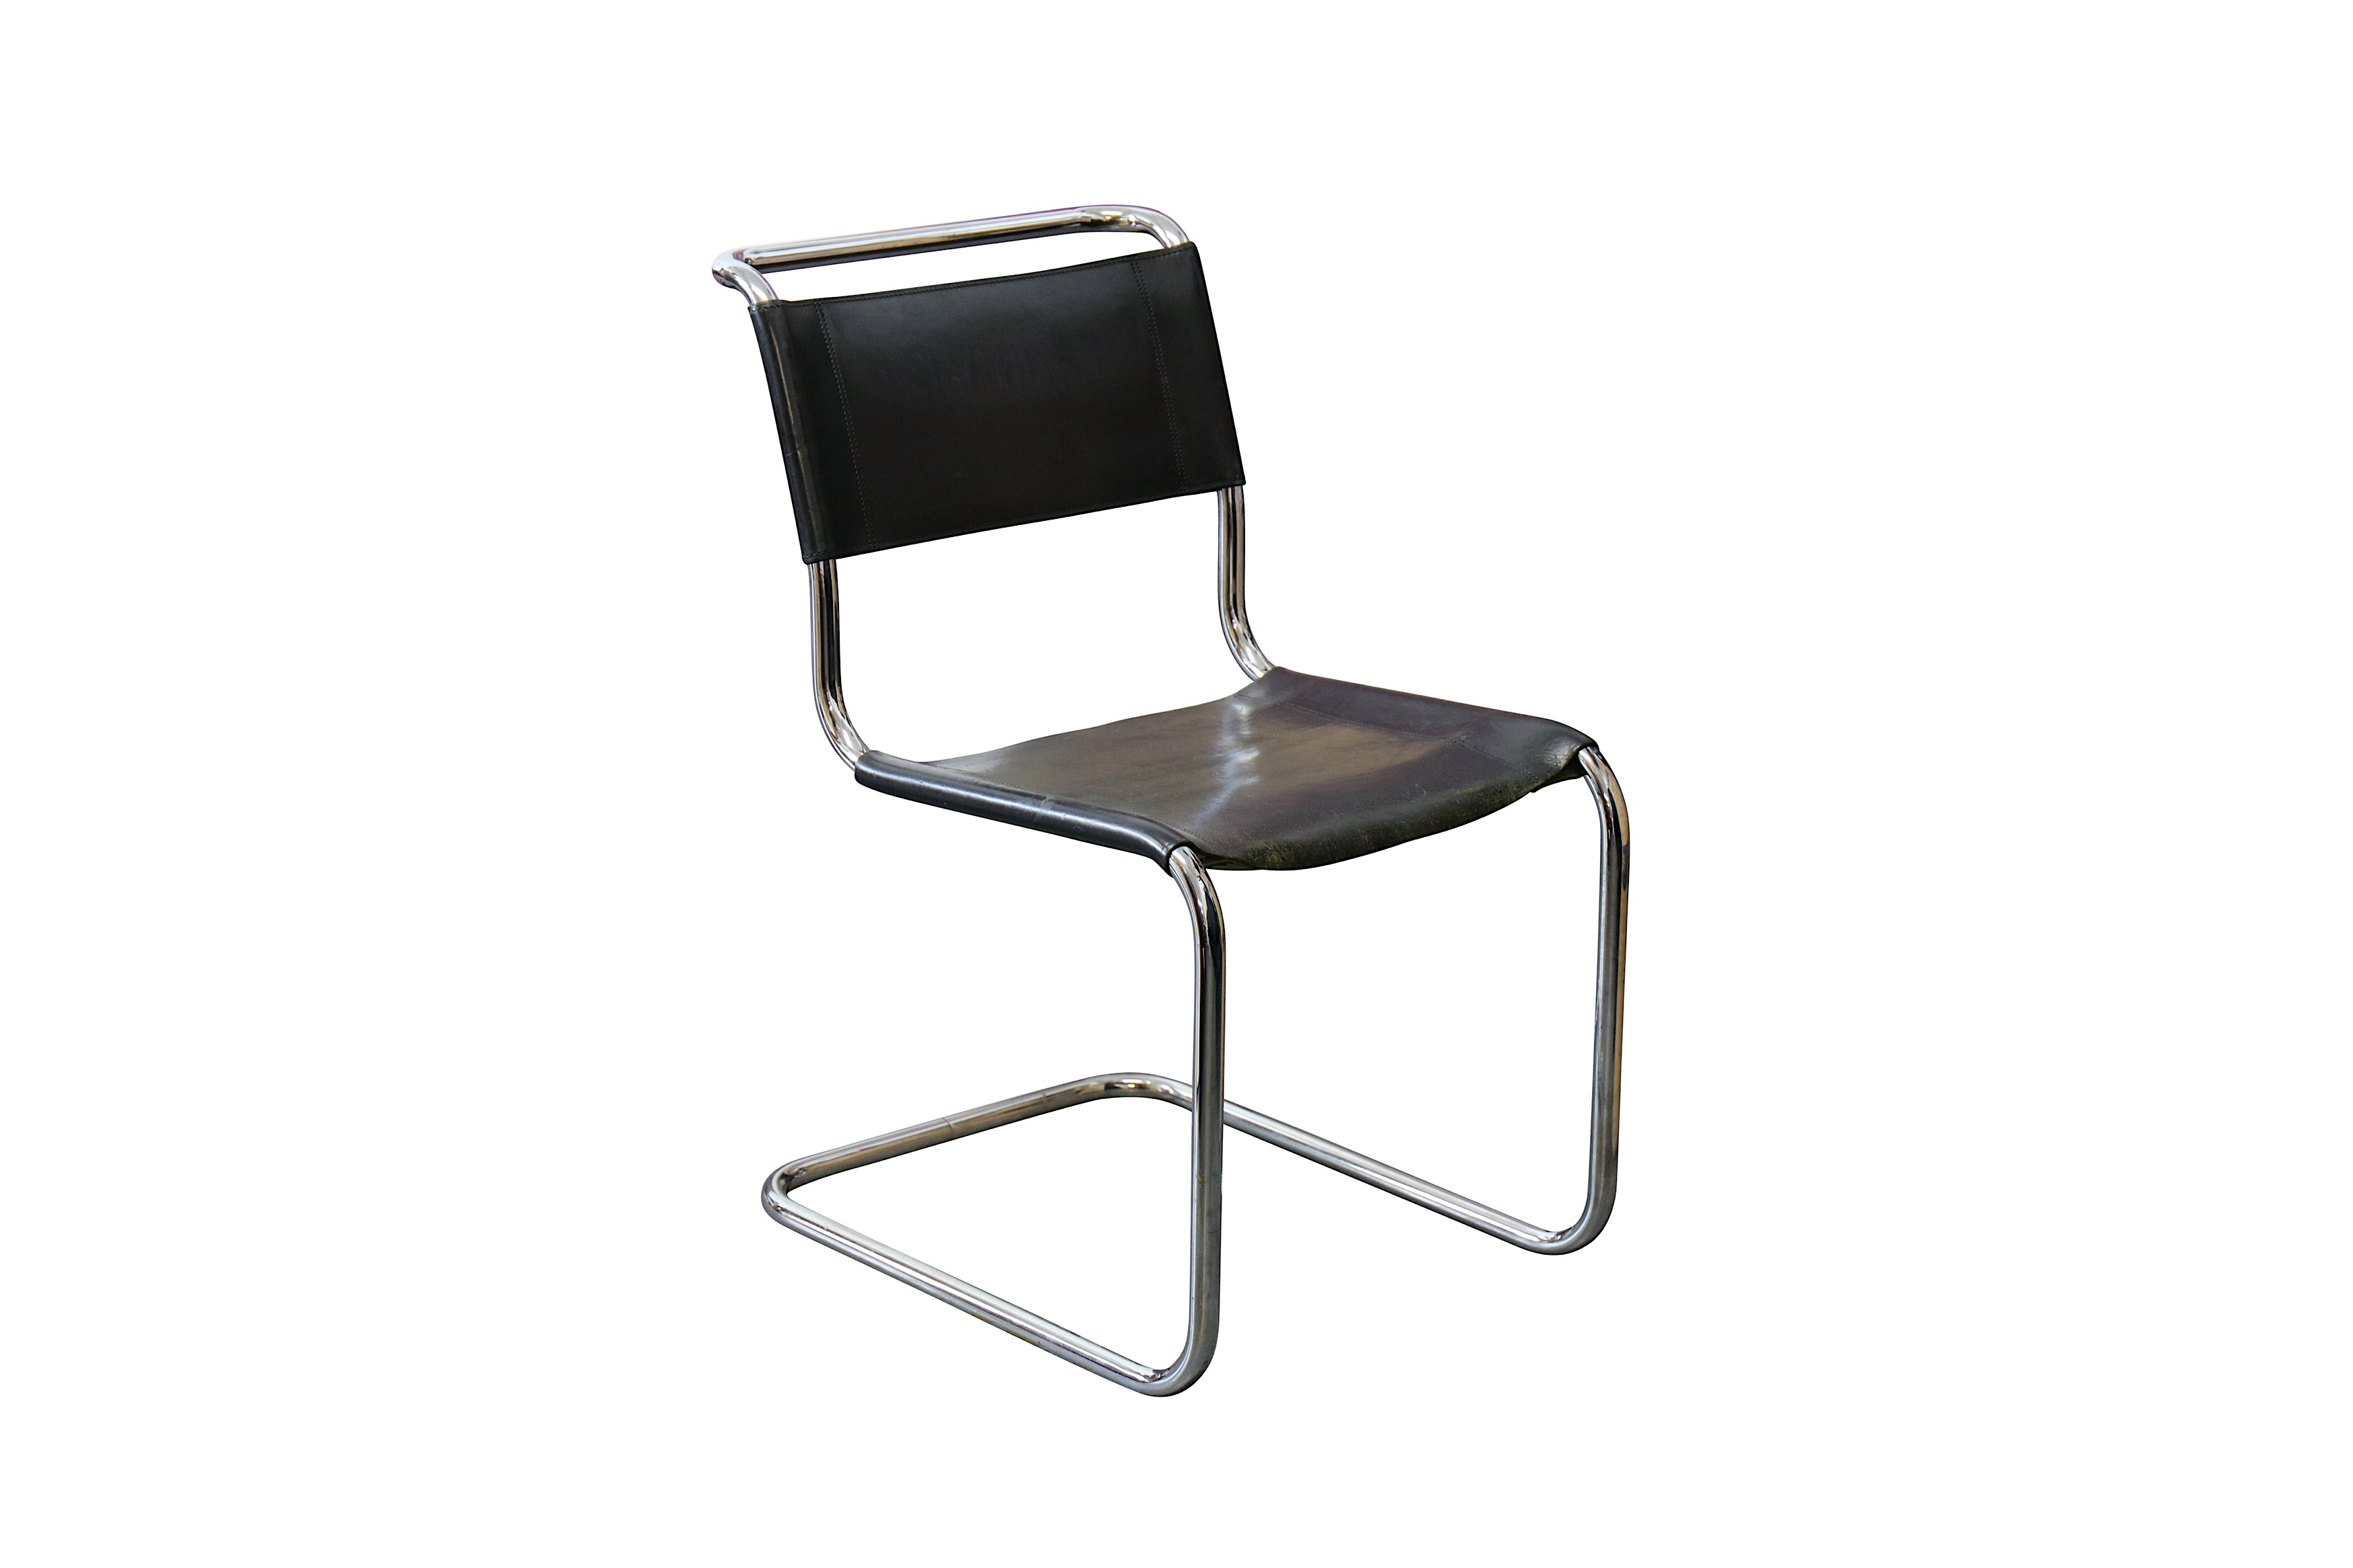 A Thonet Mart Stam S 33 black leather upholstered tubular steel cantilever dining chair